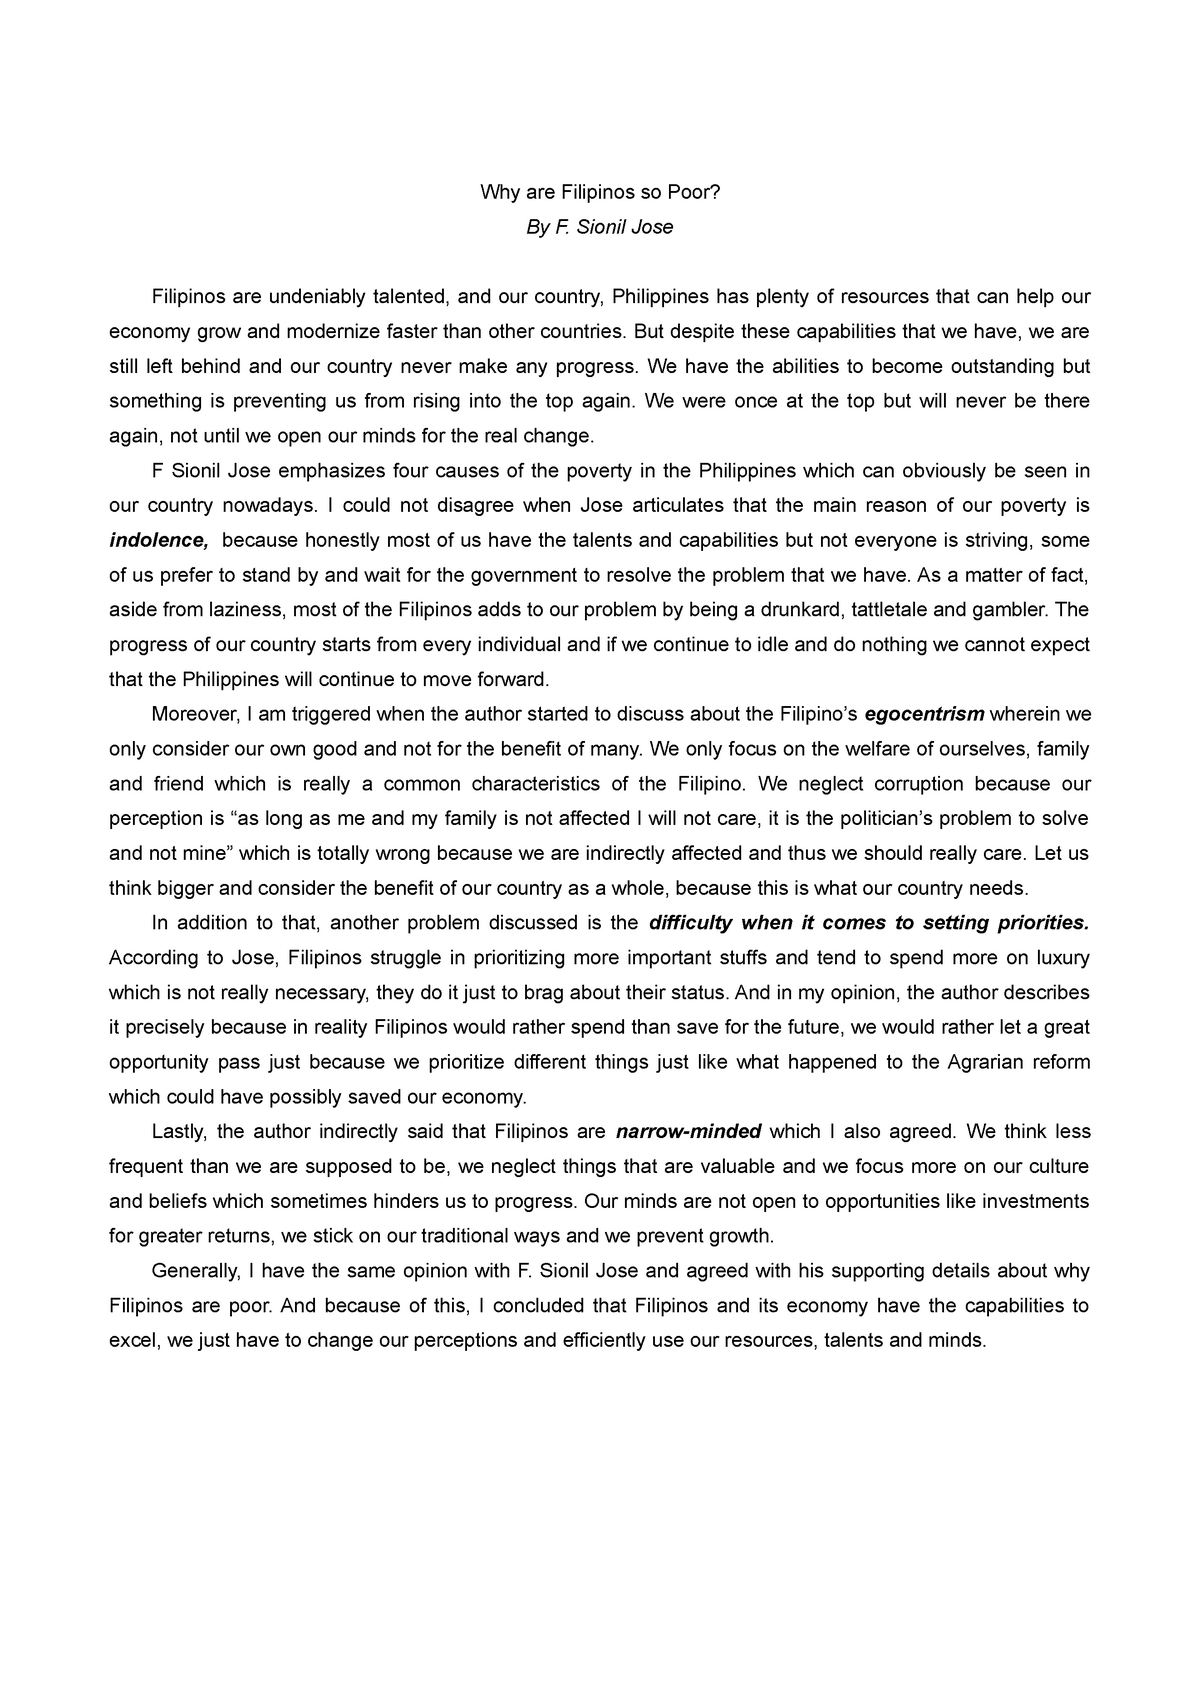 argumentative essay about poverty in the philippines